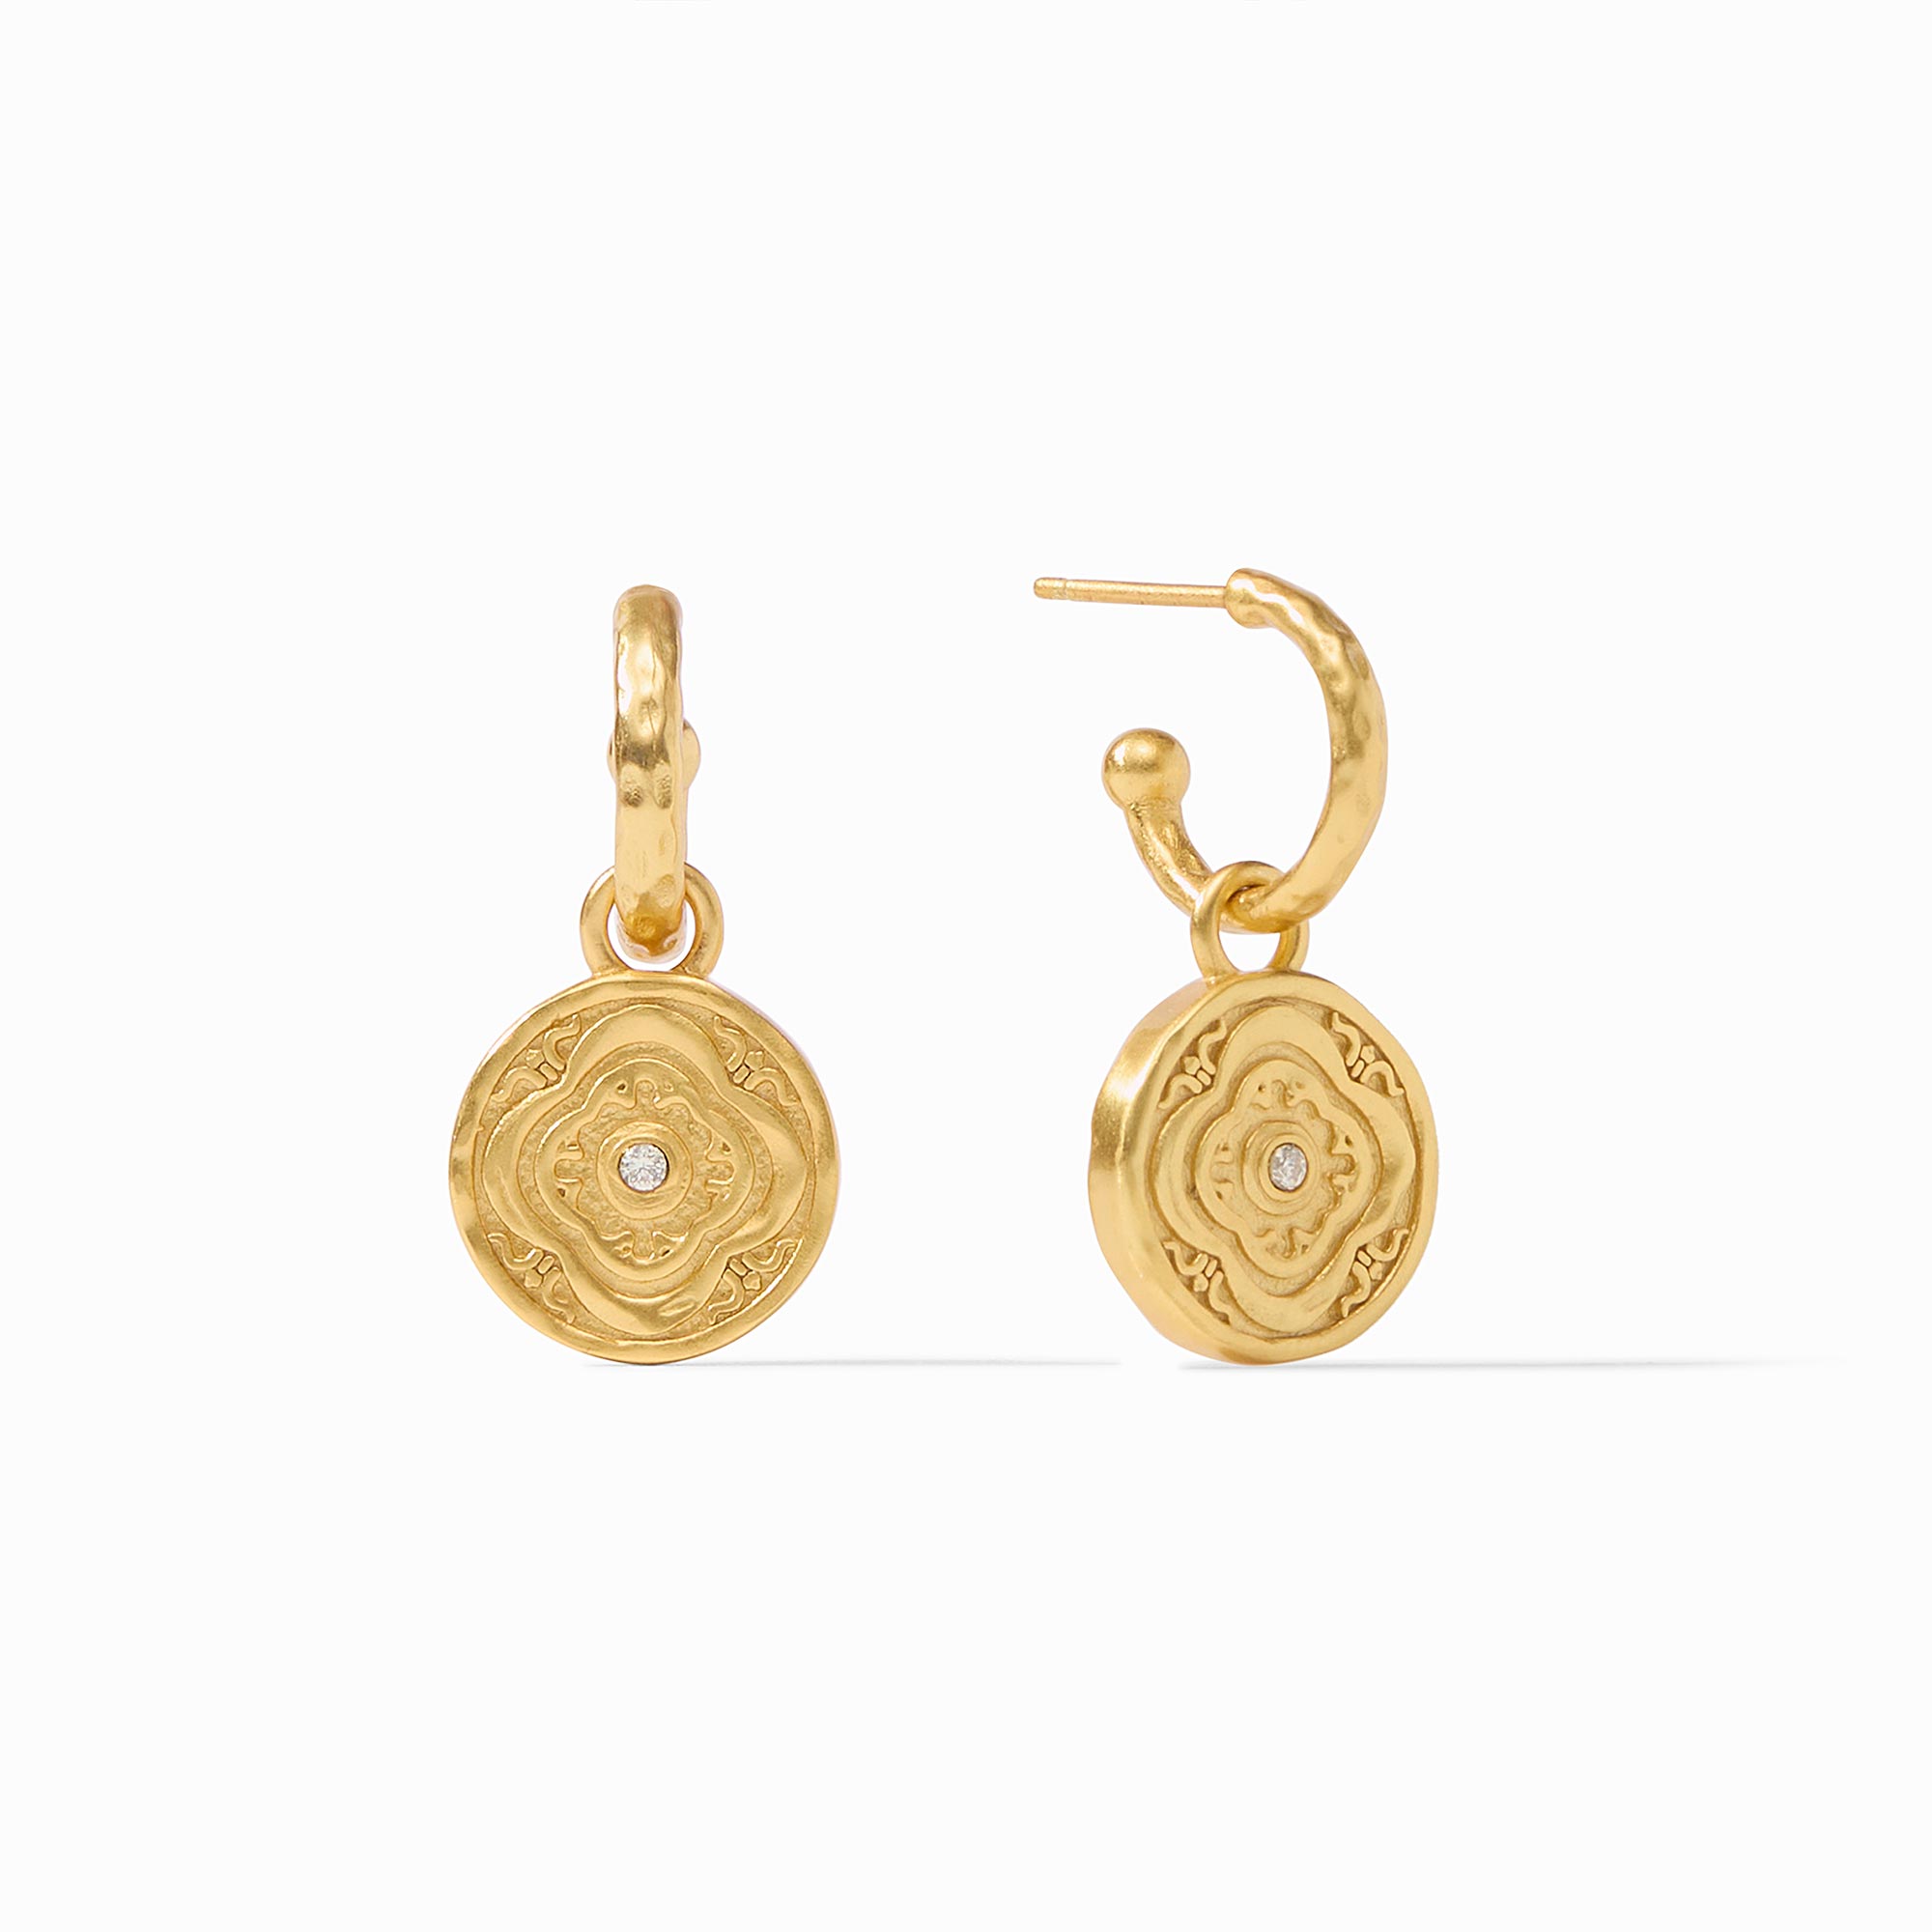 Habitually Chic® » Thirty Pairs of Chic Statement Earrings for Fall